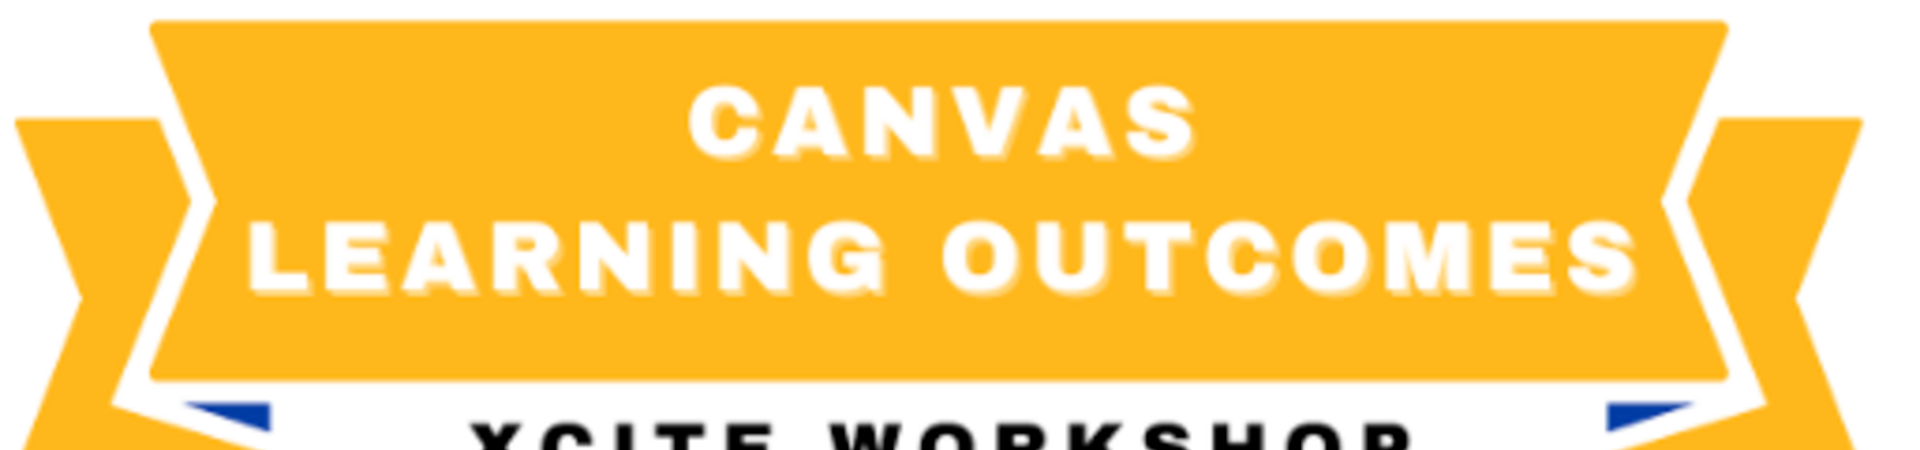 canvas learning outcomes -xcite workshops